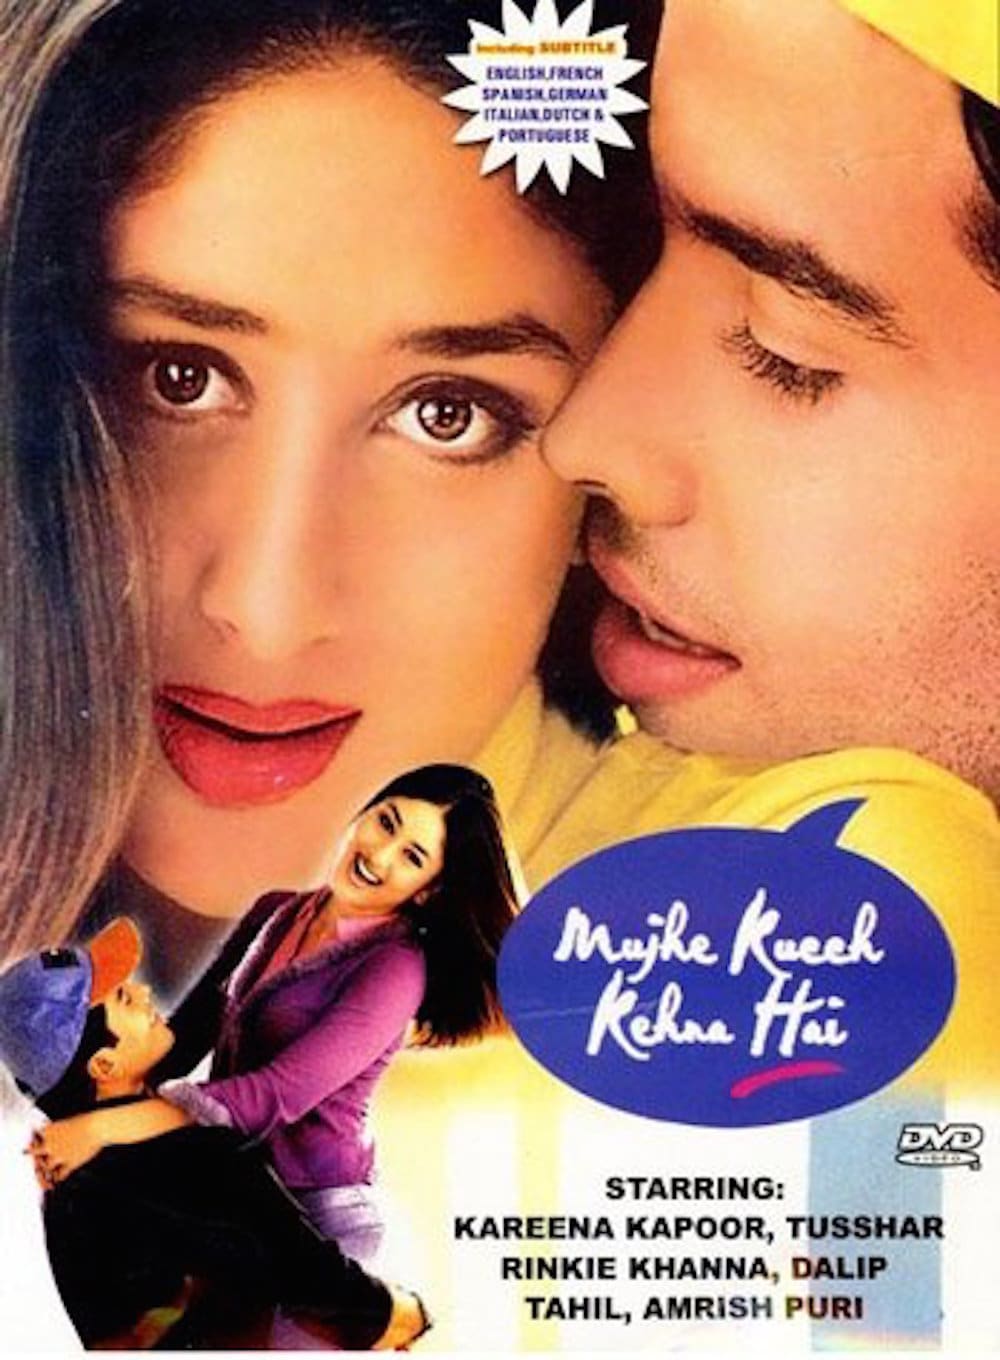 Poster for the movie "Mujhe Kucch Kehna Hai"